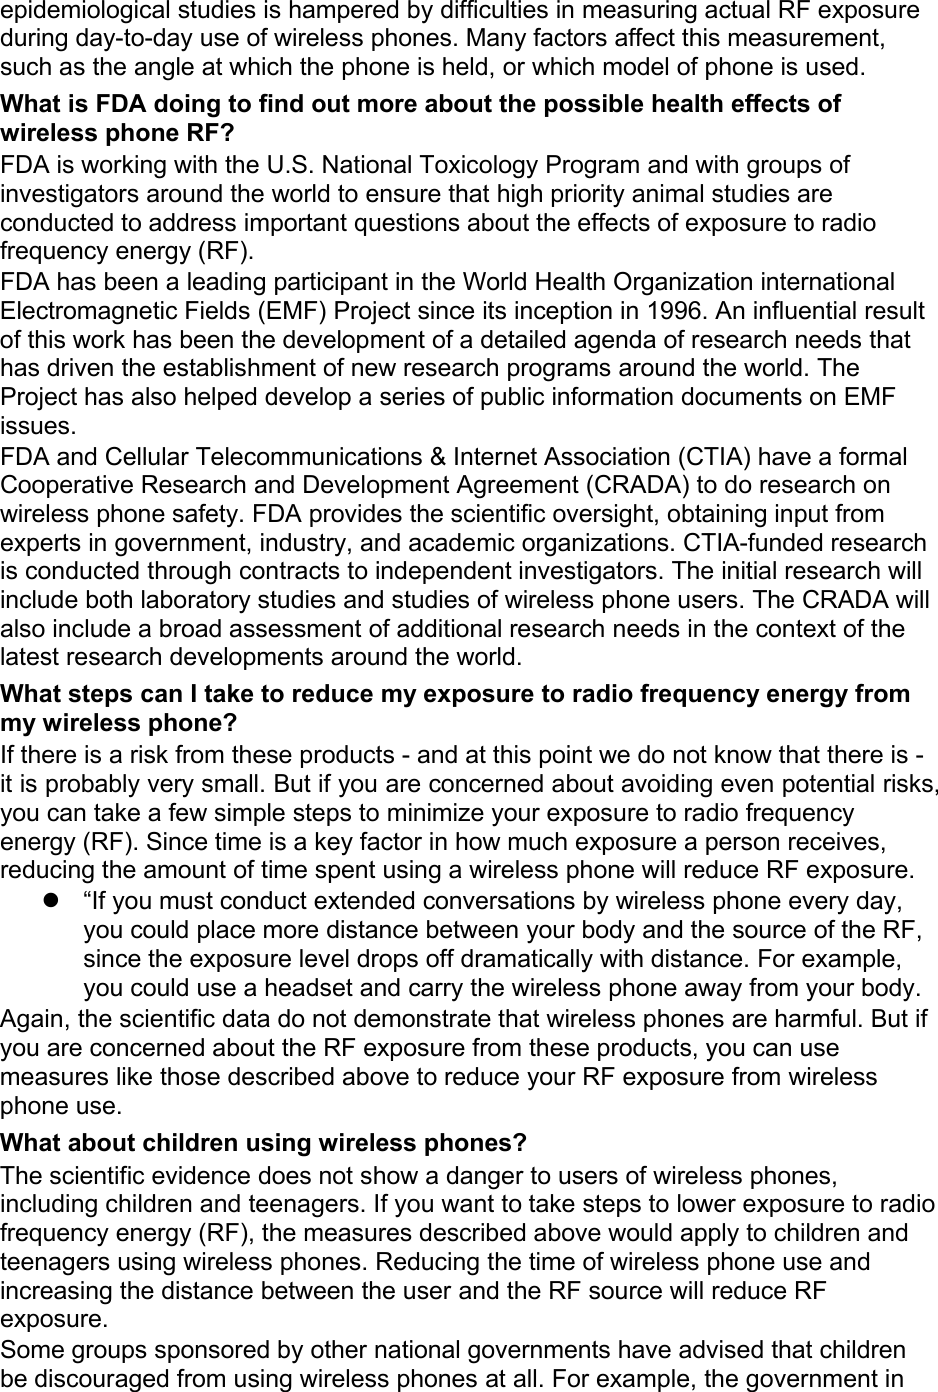 epidemiological studies is hampered by difficulties in measuring actual RF exposure during day-to-day use of wireless phones. Many factors affect this measurement, such as the angle at which the phone is held, or which model of phone is used. What is FDA doing to find out more about the possible health effects of wireless phone RF? FDA is working with the U.S. National Toxicology Program and with groups of investigators around the world to ensure that high priority animal studies are conducted to address important questions about the effects of exposure to radio frequency energy (RF). FDA has been a leading participant in the World Health Organization international Electromagnetic Fields (EMF) Project since its inception in 1996. An influential result of this work has been the development of a detailed agenda of research needs that has driven the establishment of new research programs around the world. The Project has also helped develop a series of public information documents on EMF issues. FDA and Cellular Telecommunications &amp; Internet Association (CTIA) have a formal Cooperative Research and Development Agreement (CRADA) to do research on wireless phone safety. FDA provides the scientific oversight, obtaining input from experts in government, industry, and academic organizations. CTIA-funded research is conducted through contracts to independent investigators. The initial research will include both laboratory studies and studies of wireless phone users. The CRADA will also include a broad assessment of additional research needs in the context of the latest research developments around the world. What steps can I take to reduce my exposure to radio frequency energy from my wireless phone? If there is a risk from these products - and at this point we do not know that there is -  it is probably very small. But if you are concerned about avoiding even potential risks, you can take a few simple steps to minimize your exposure to radio frequency energy (RF). Since time is a key factor in how much exposure a person receives, reducing the amount of time spent using a wireless phone will reduce RF exposure.   “If you must conduct extended conversations by wireless phone every day, you could place more distance between your body and the source of the RF, since the exposure level drops off dramatically with distance. For example, you could use a headset and carry the wireless phone away from your body. Again, the scientific data do not demonstrate that wireless phones are harmful. But if you are concerned about the RF exposure from these products, you can use measures like those described above to reduce your RF exposure from wireless phone use. What about children using wireless phones? The scientific evidence does not show a danger to users of wireless phones, including children and teenagers. If you want to take steps to lower exposure to radio frequency energy (RF), the measures described above would apply to children and teenagers using wireless phones. Reducing the time of wireless phone use and increasing the distance between the user and the RF source will reduce RF exposure. Some groups sponsored by other national governments have advised that children be discouraged from using wireless phones at all. For example, the government in 